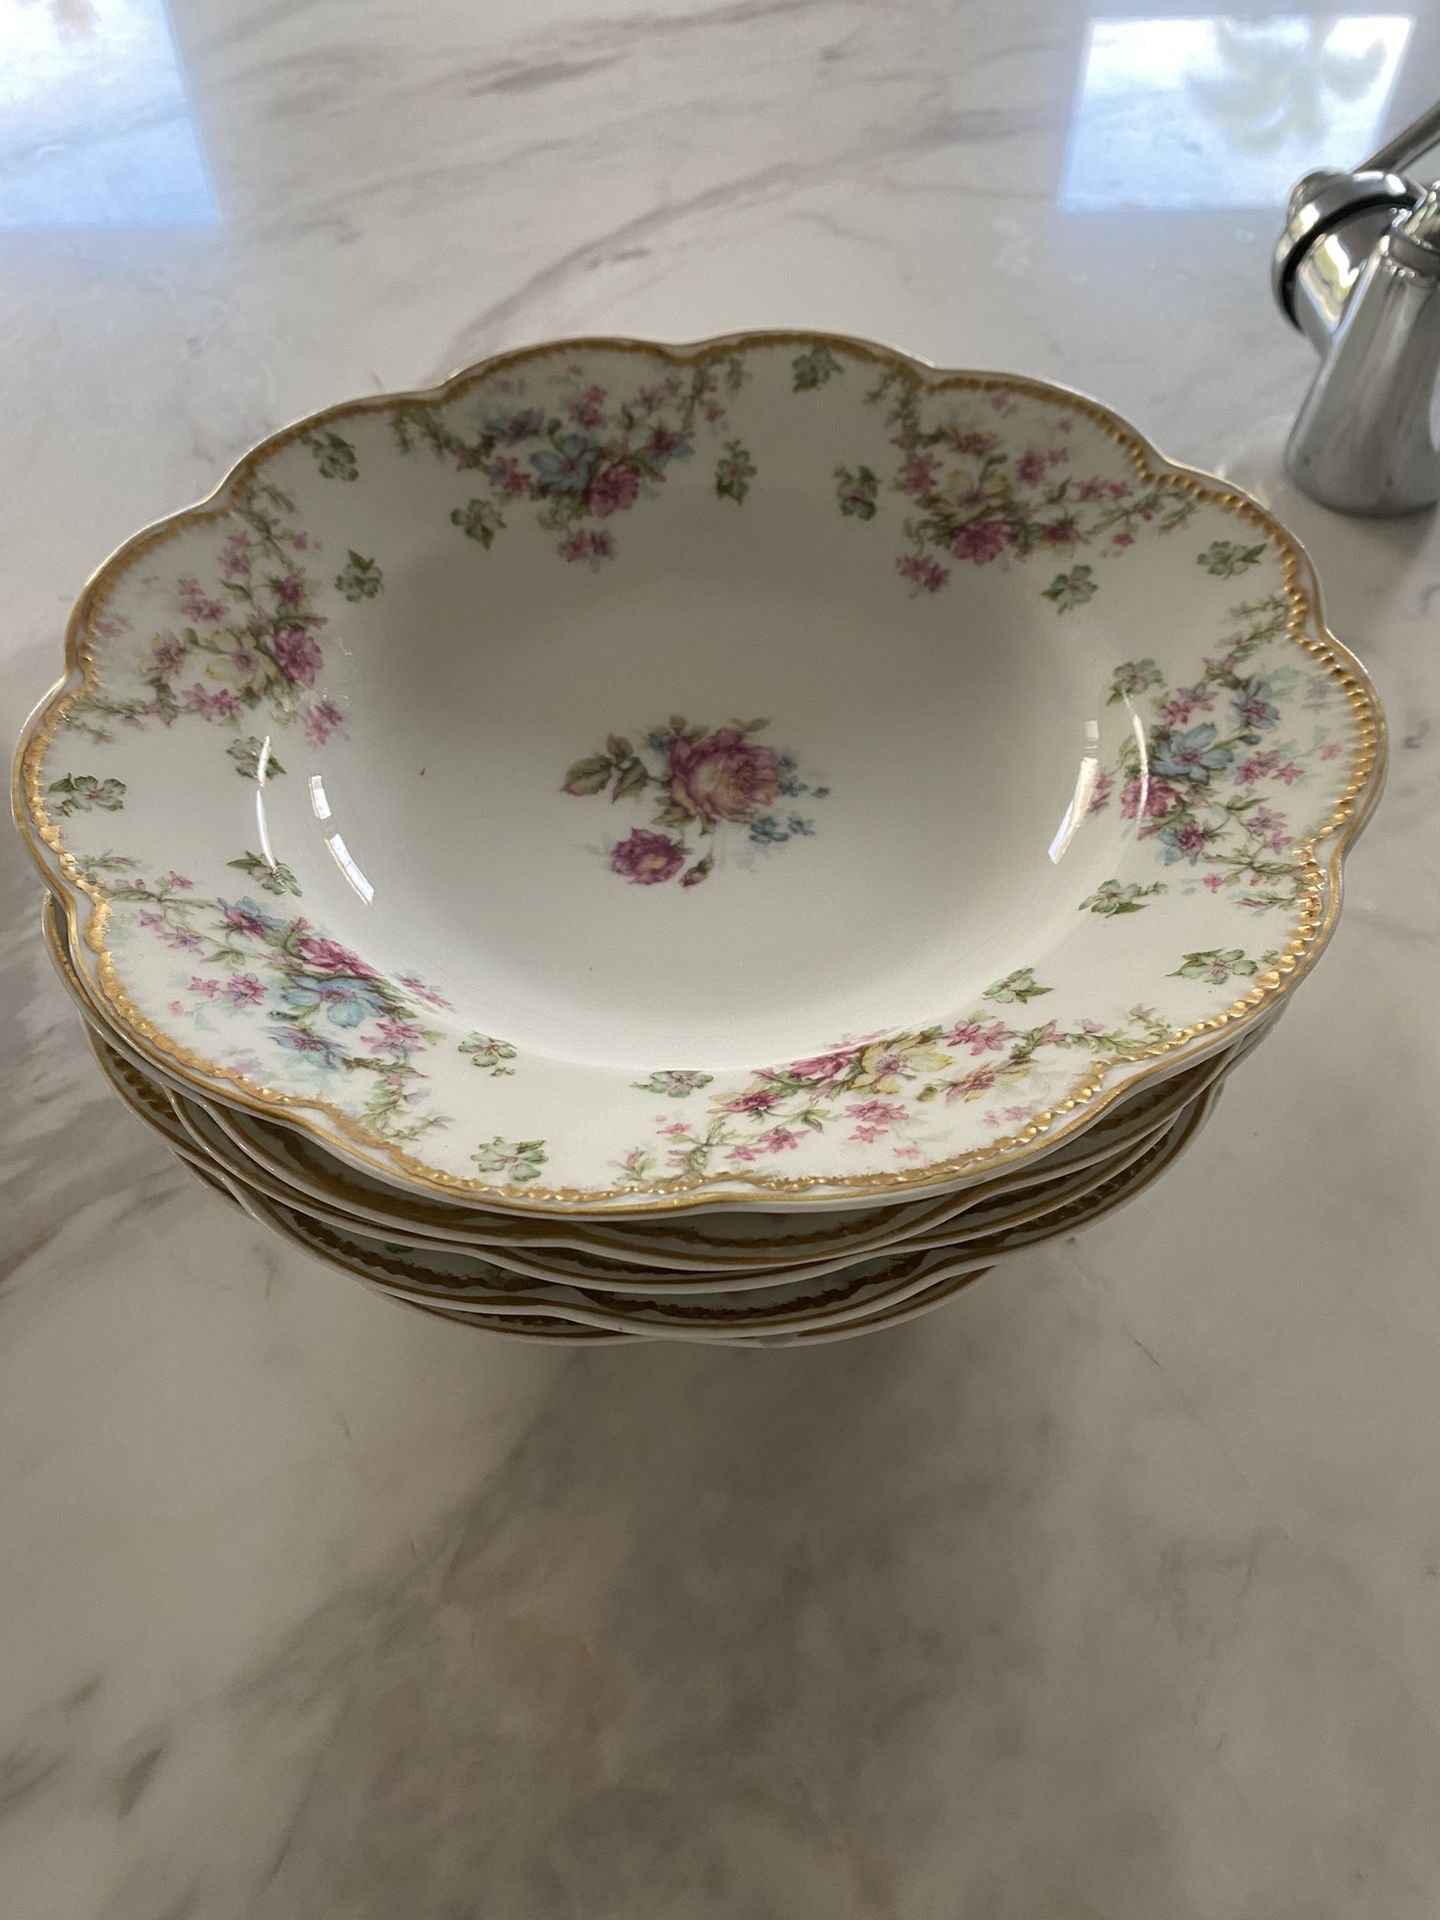 Hold For Tammy- Rare Limoge Soup Bowls